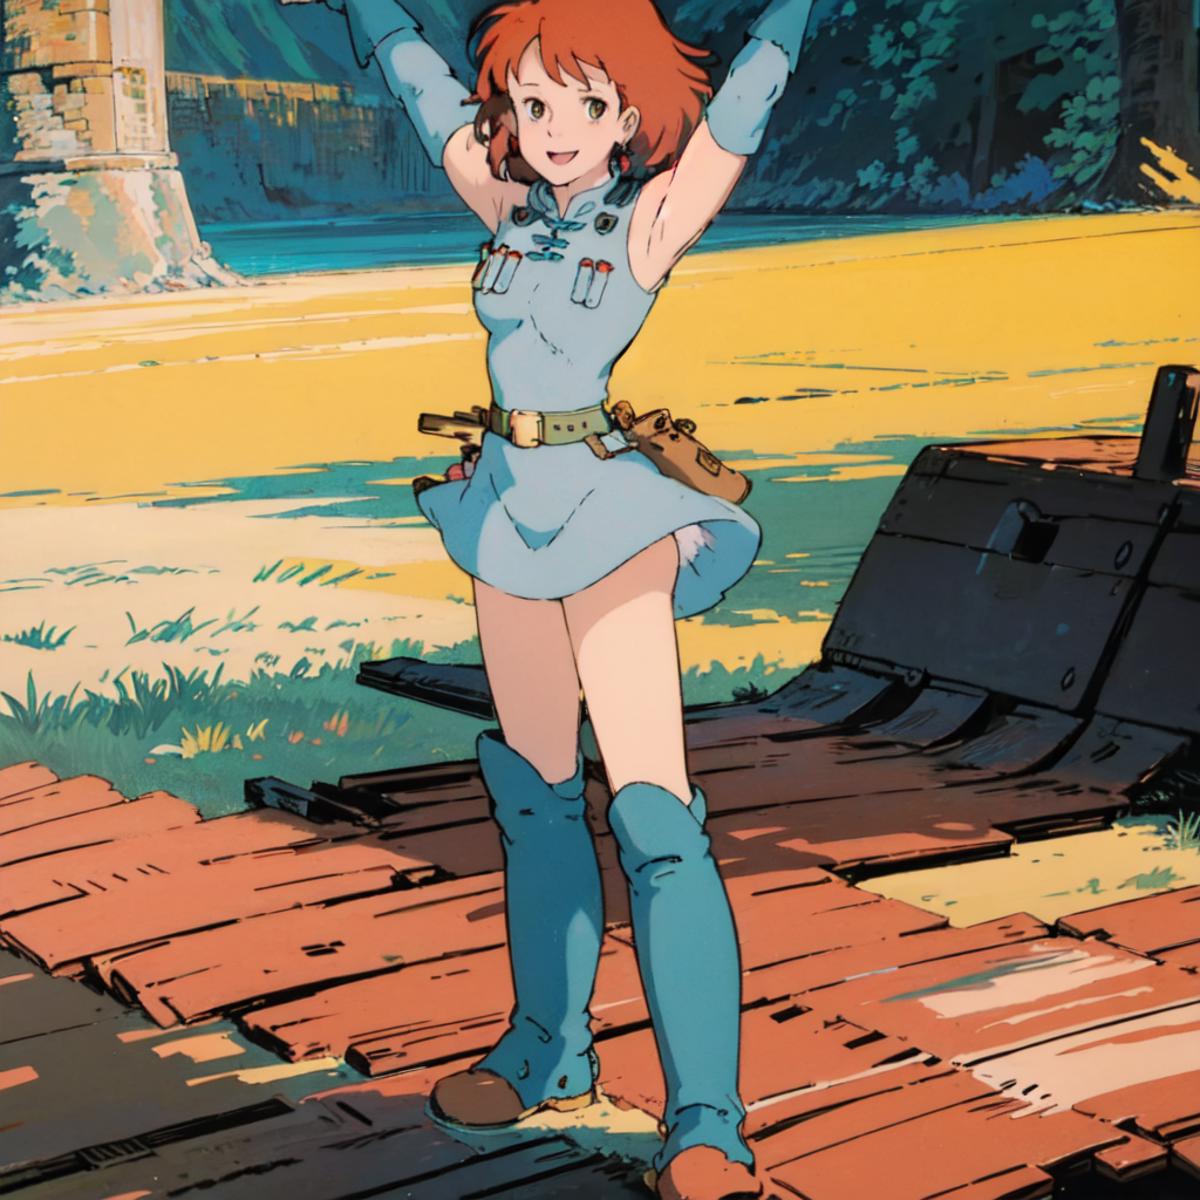 Ghibli - Nausicaa (Nausicaä of the Valley of the Wind (film)) image by ARCHEDamnit